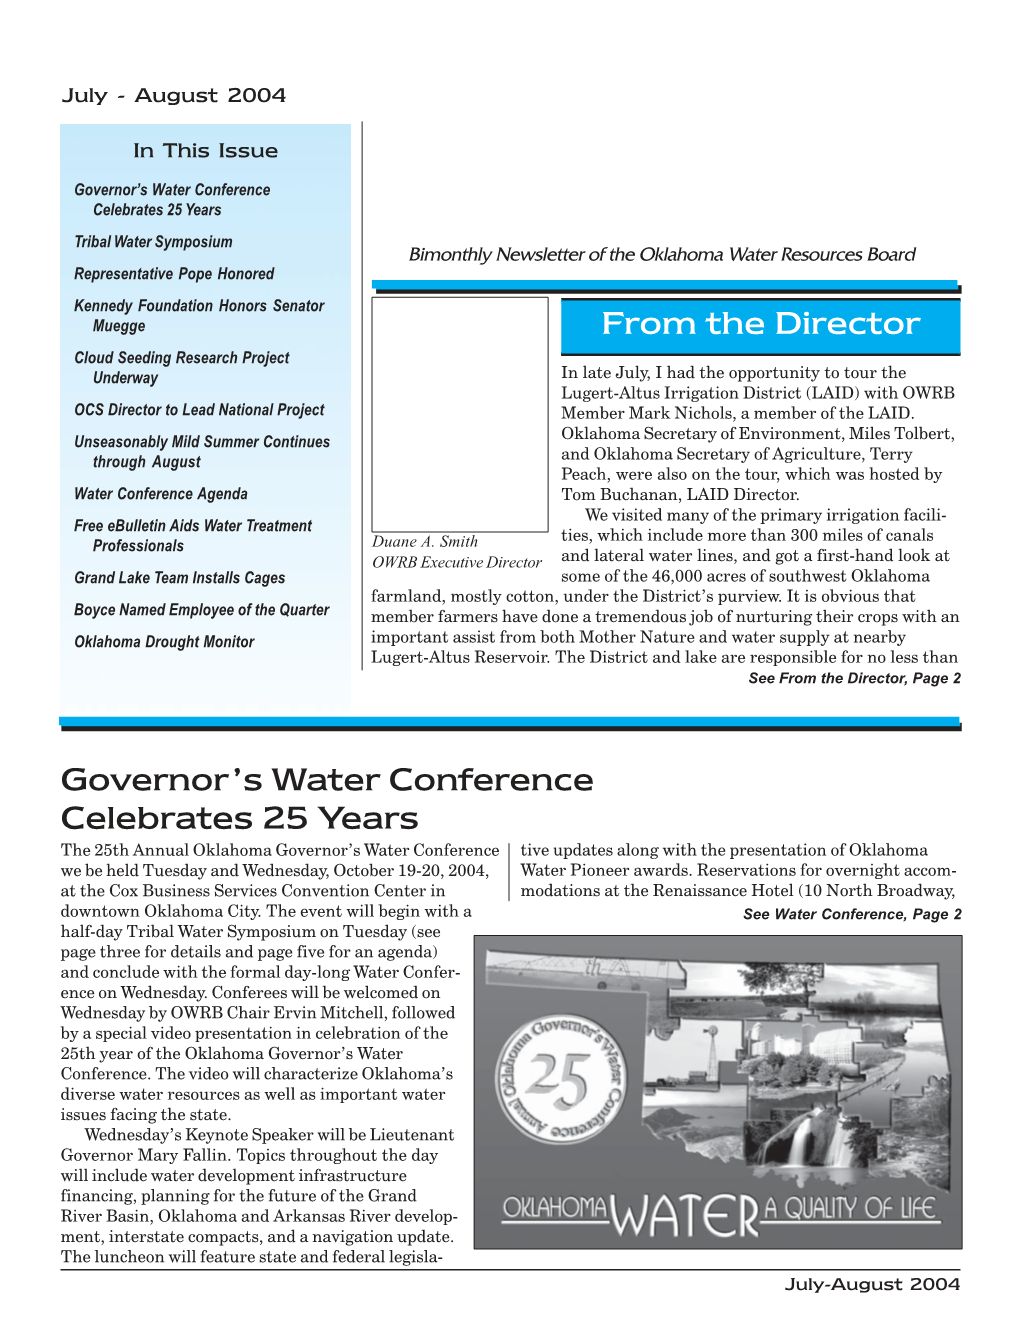 From the Director Governor's Water Conference Celebrates 25 Years